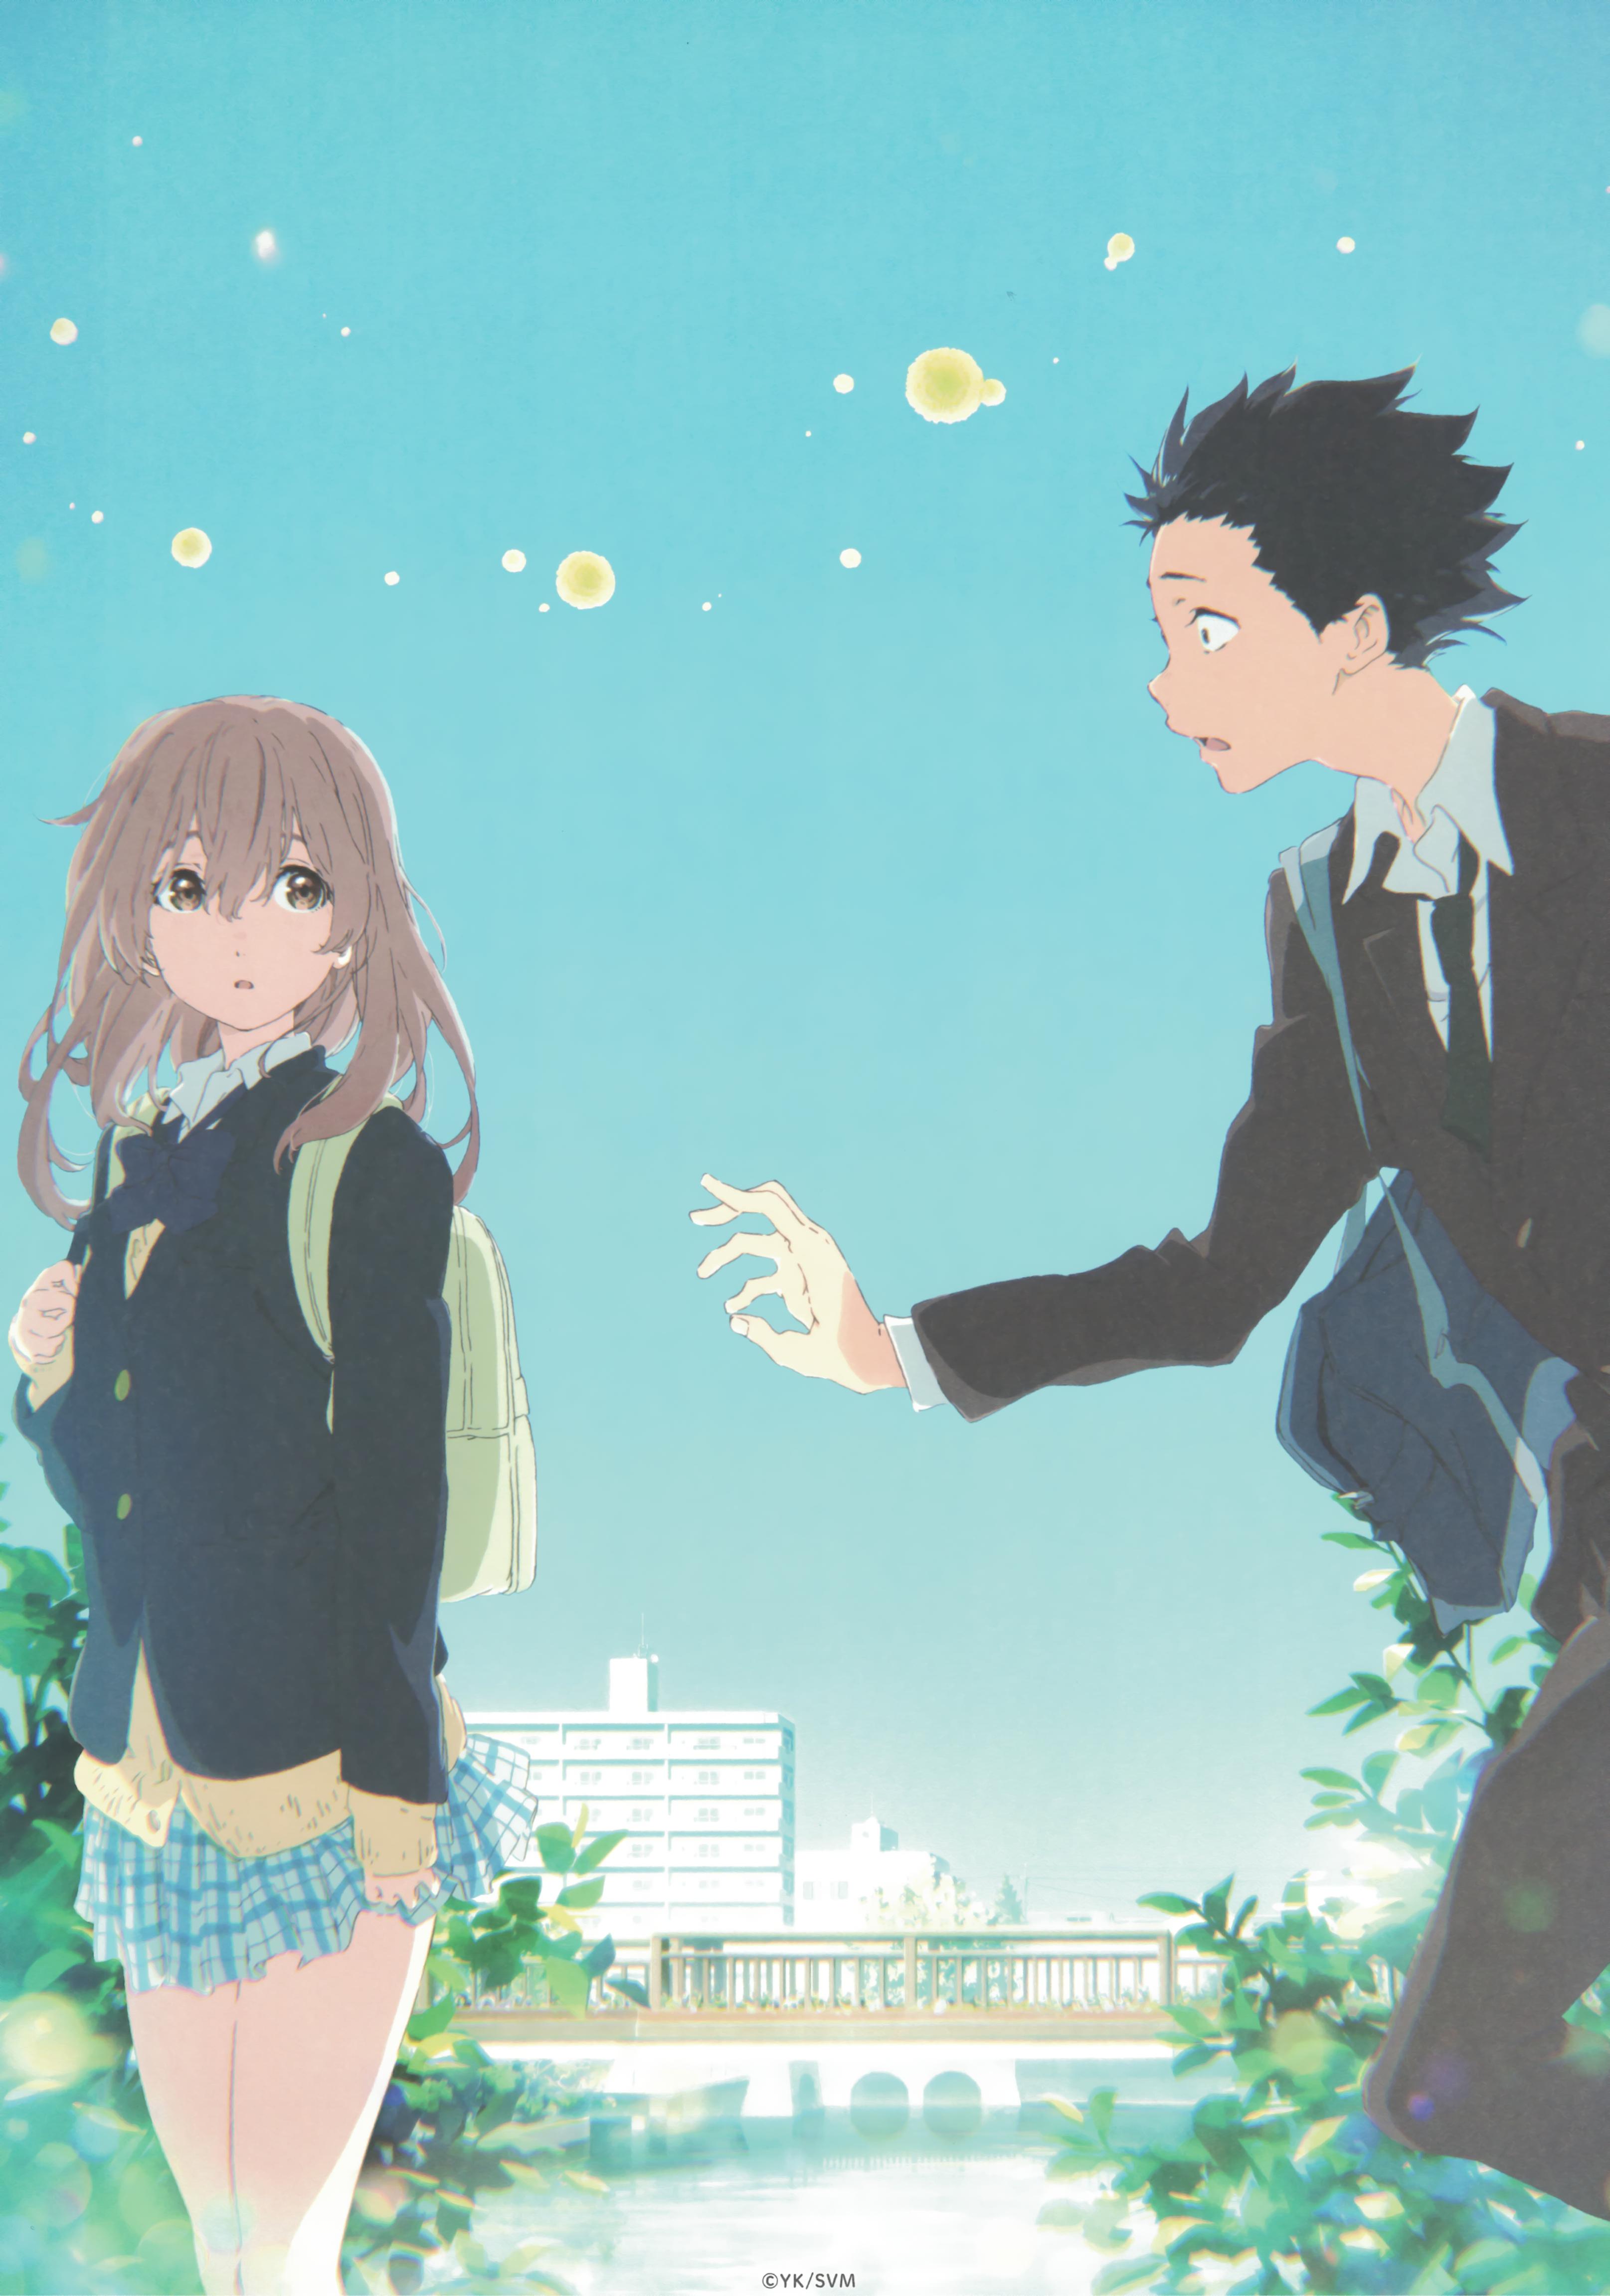 A Silent Voice Wallpapers - Top Free A Silent Voice Backgrounds